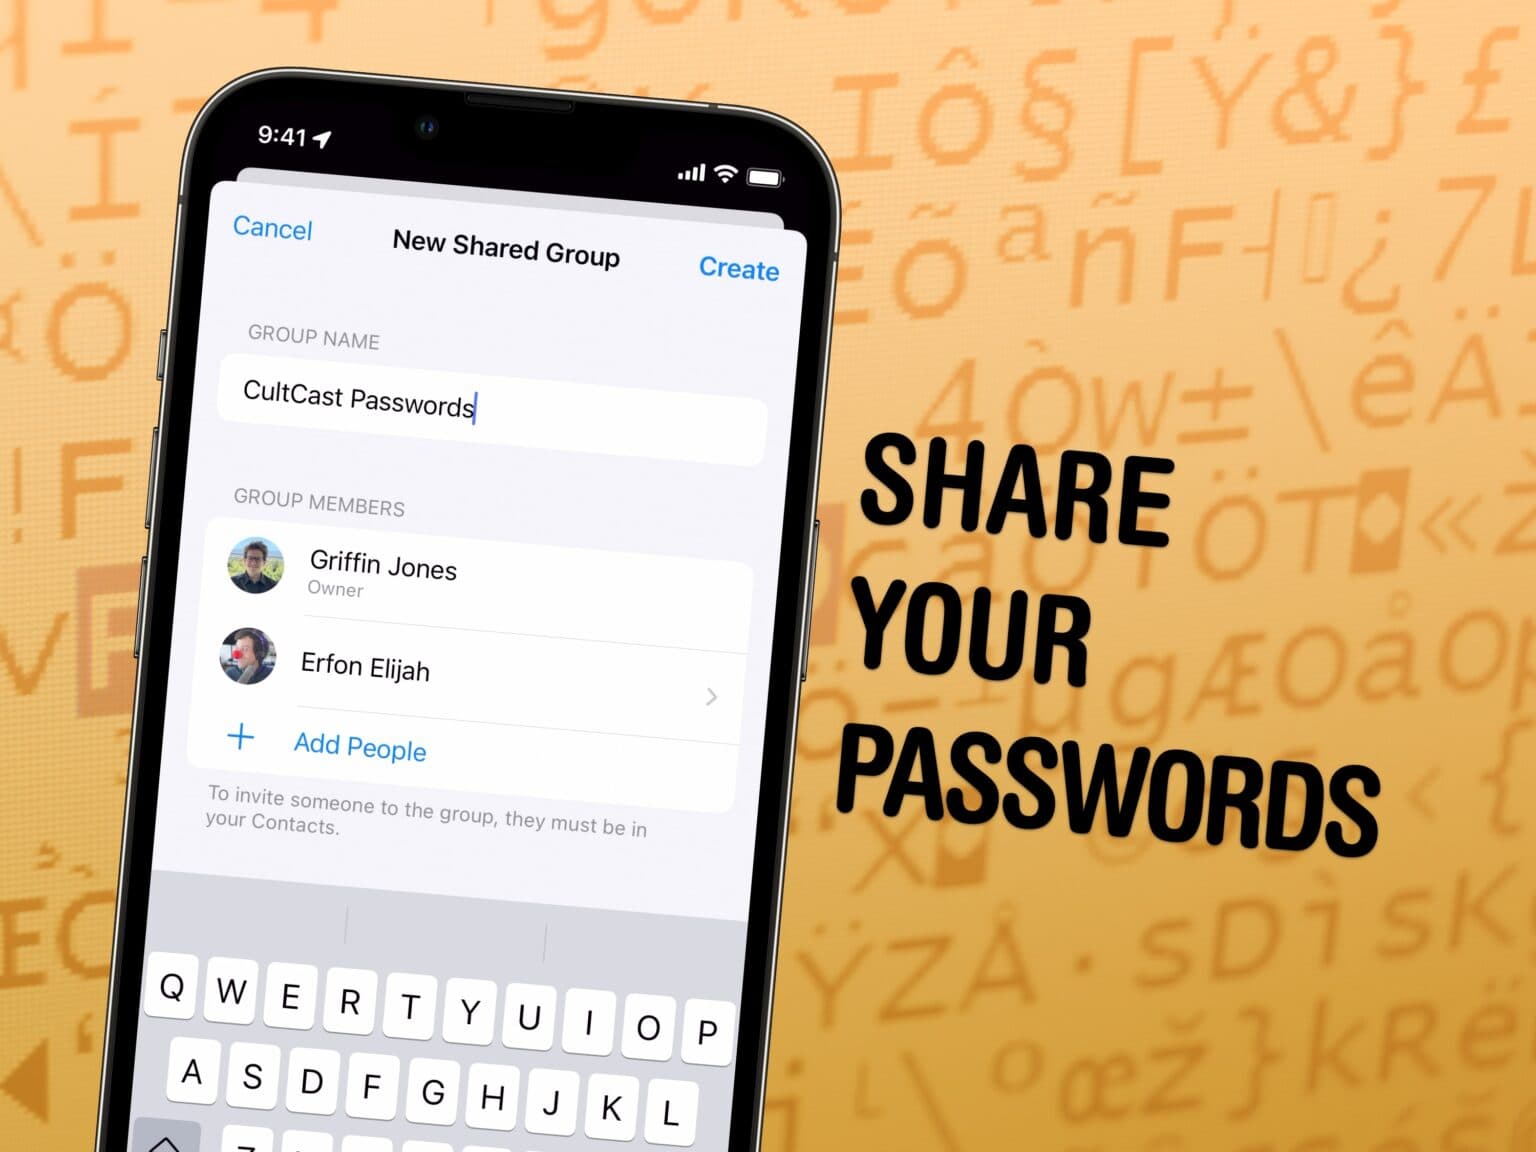 Share Your Passwords